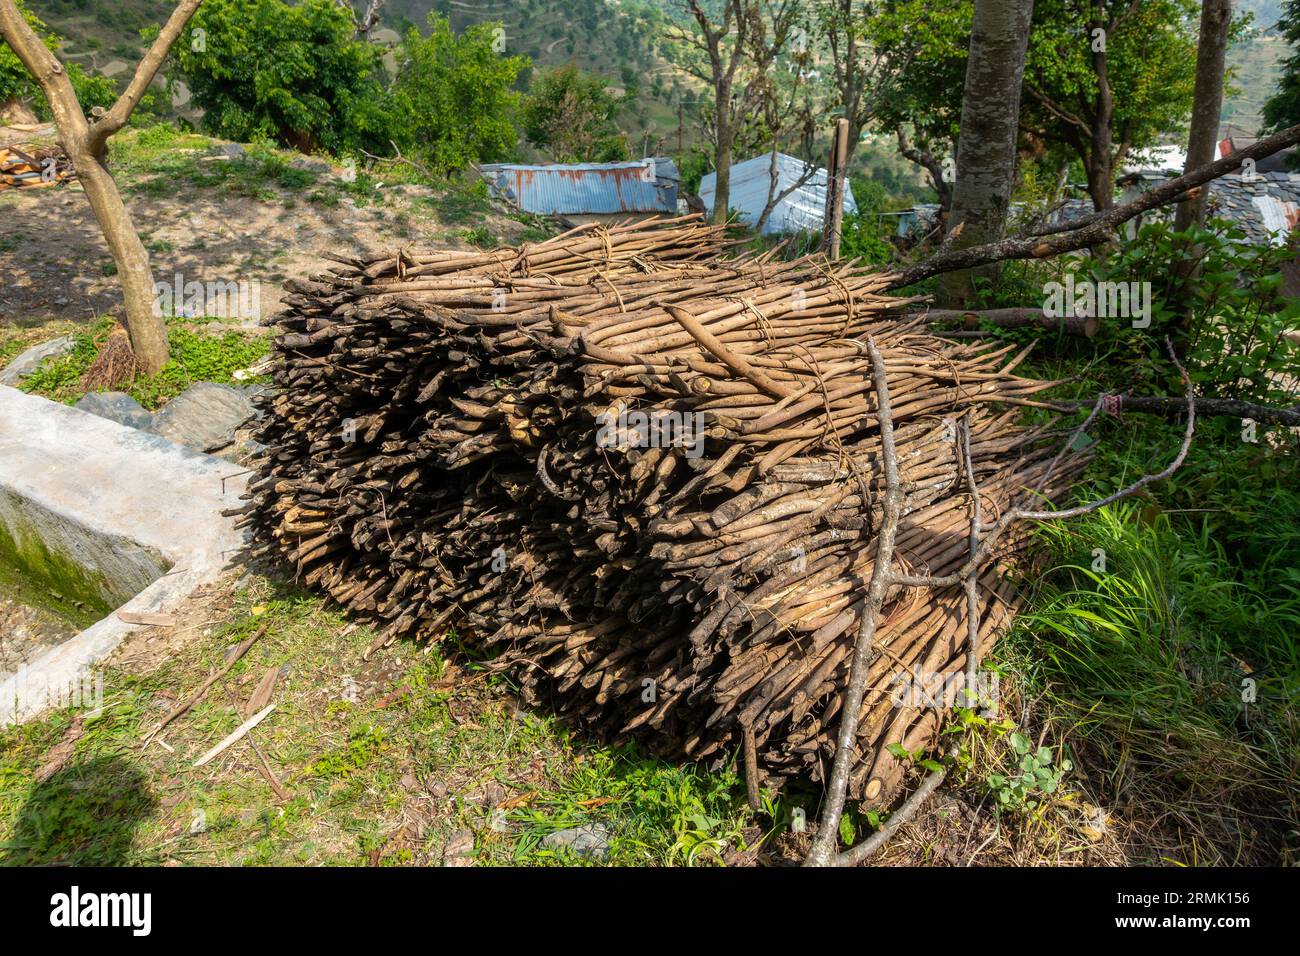 Gathered firewood stacks from forests by Uttarakhand villagers in the countryside of India. Sustainable resource collection amidst natural landscapes. Stock Photo